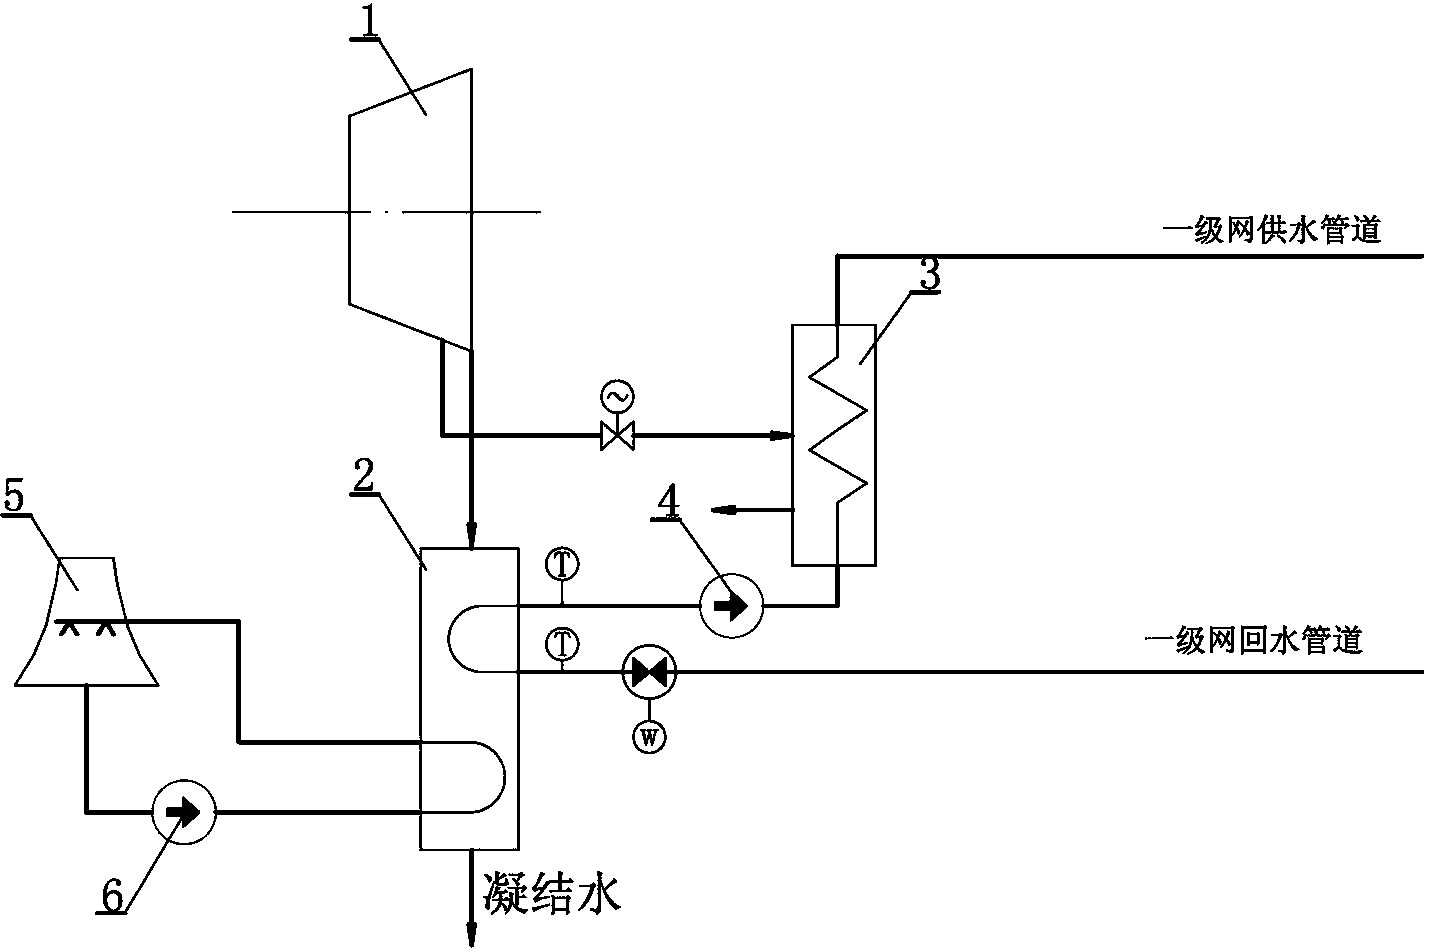 Energy saving device for directly recycling waste heat from condenser of power plant to supply heat and energy saving method